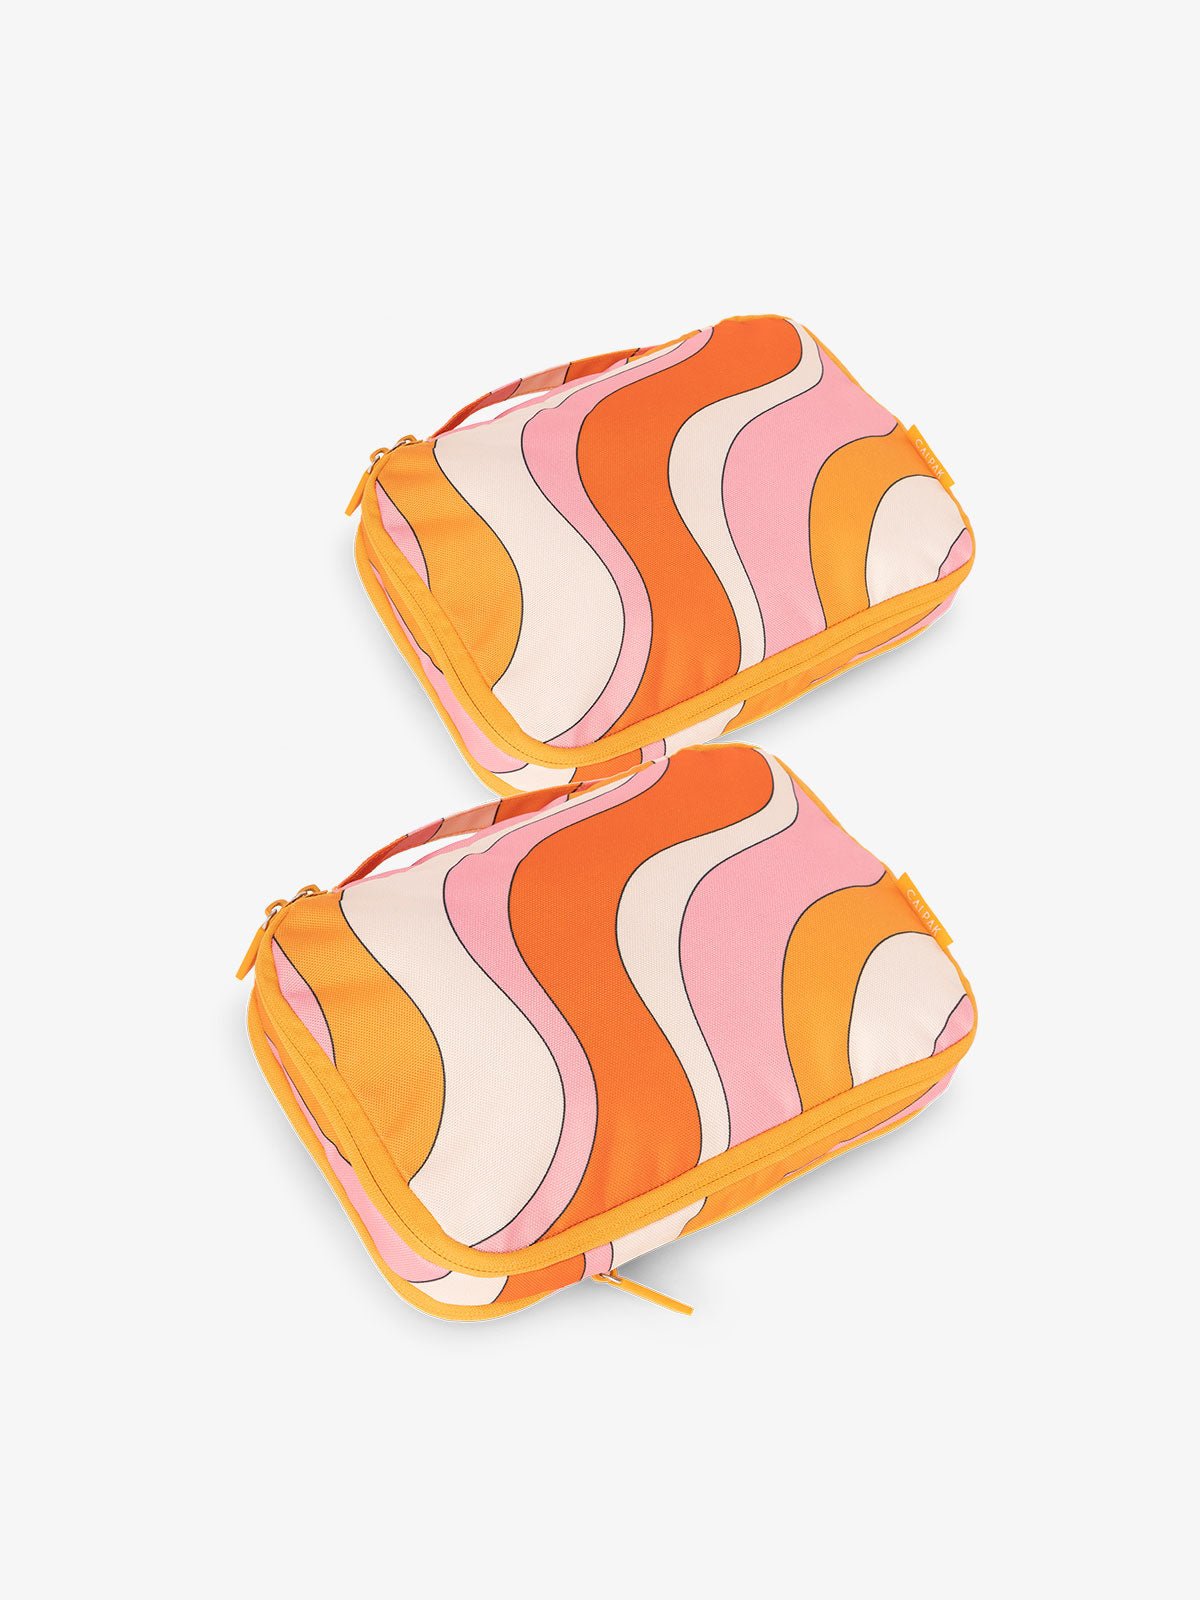 CALPAK small compression packing cubes in orange and pink wavy print